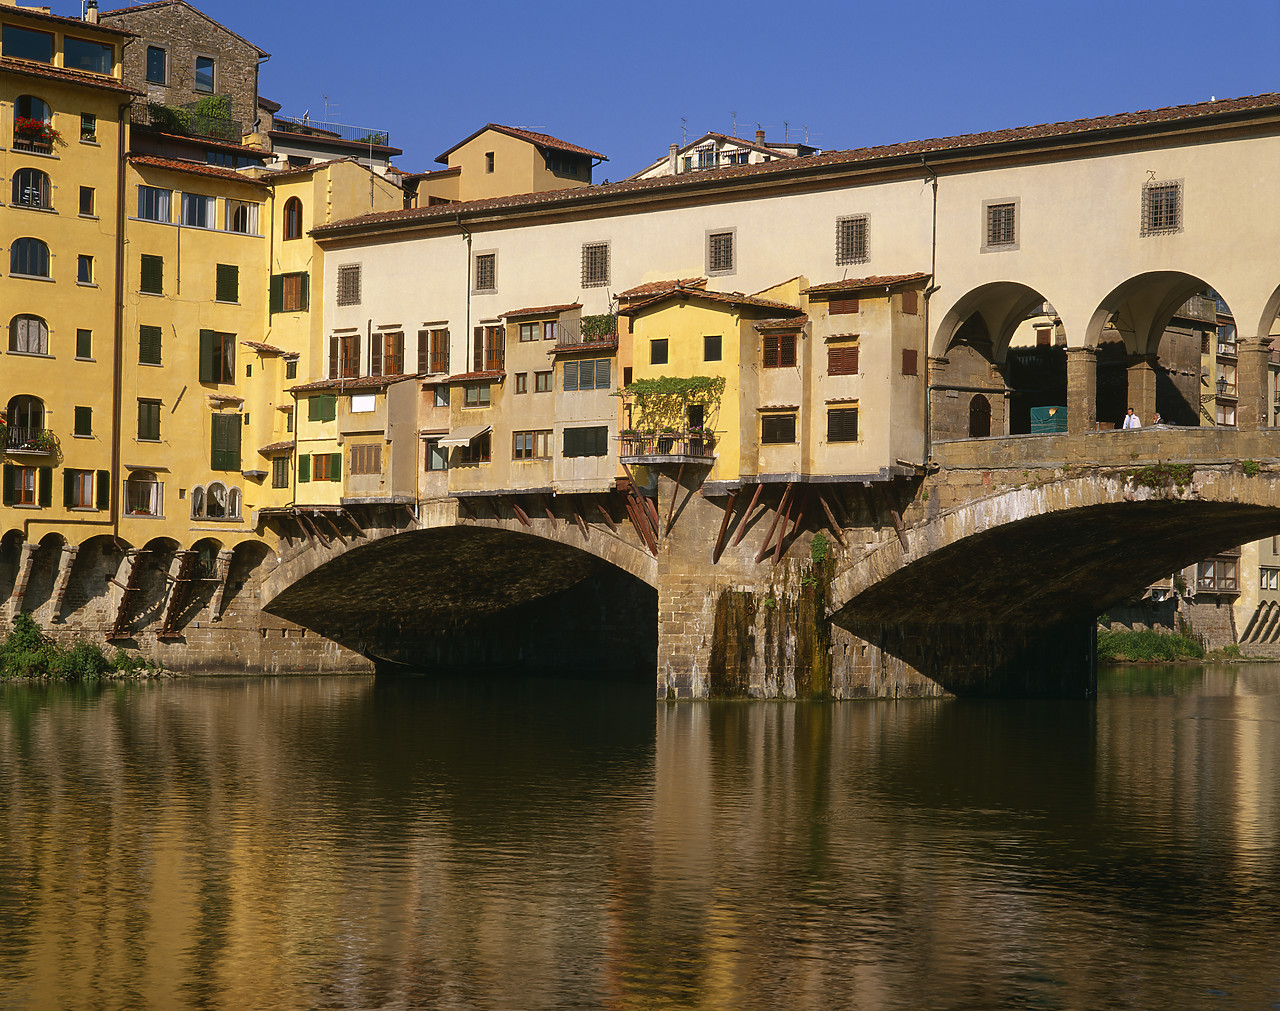 #020093-2 - Ponte Vecchio Reflecting in River Arno, Florence, Tuscany, Italy